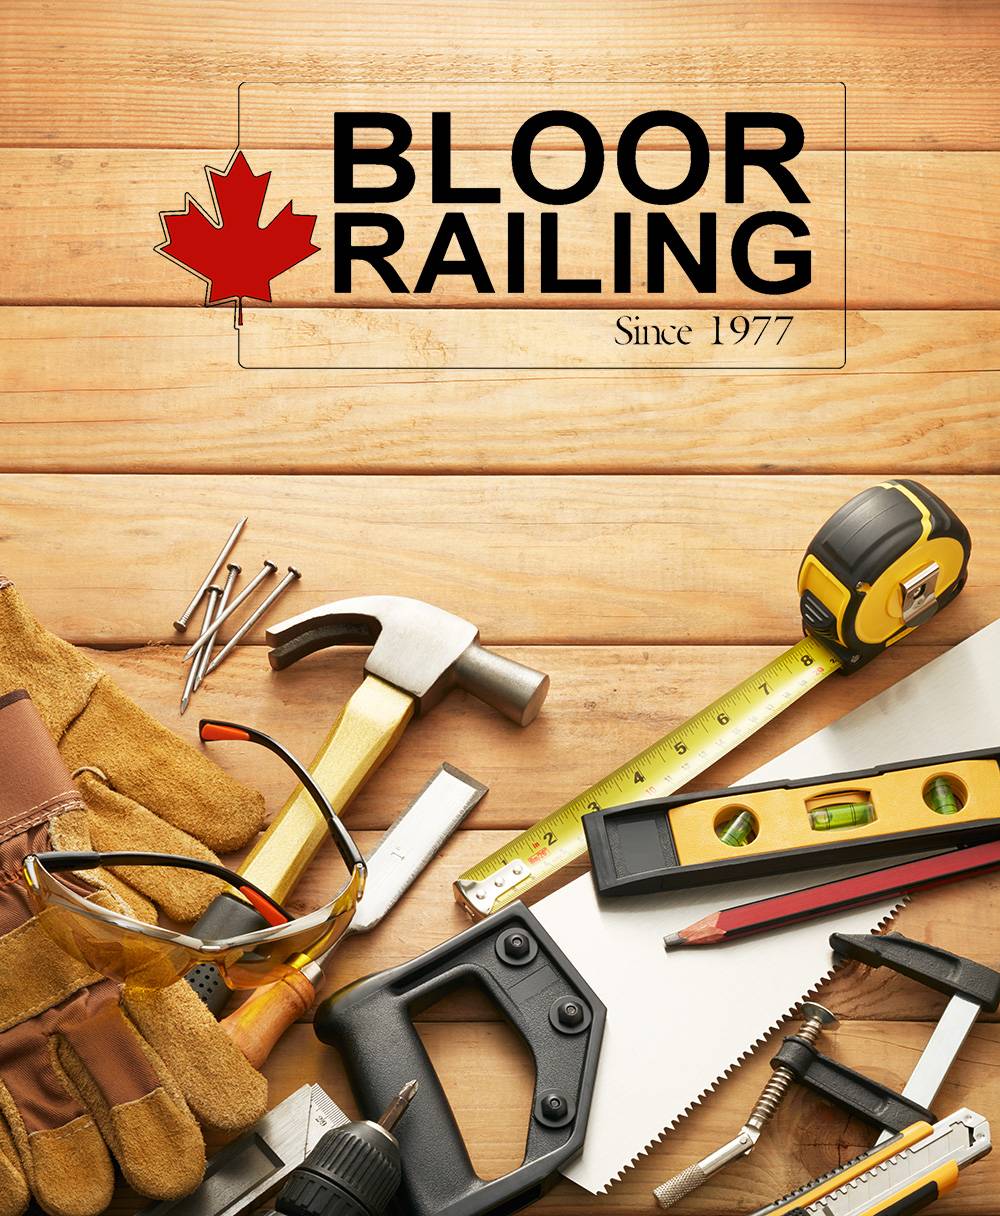 Bloor Railing sells stairs and railings products in the Oshawa area.